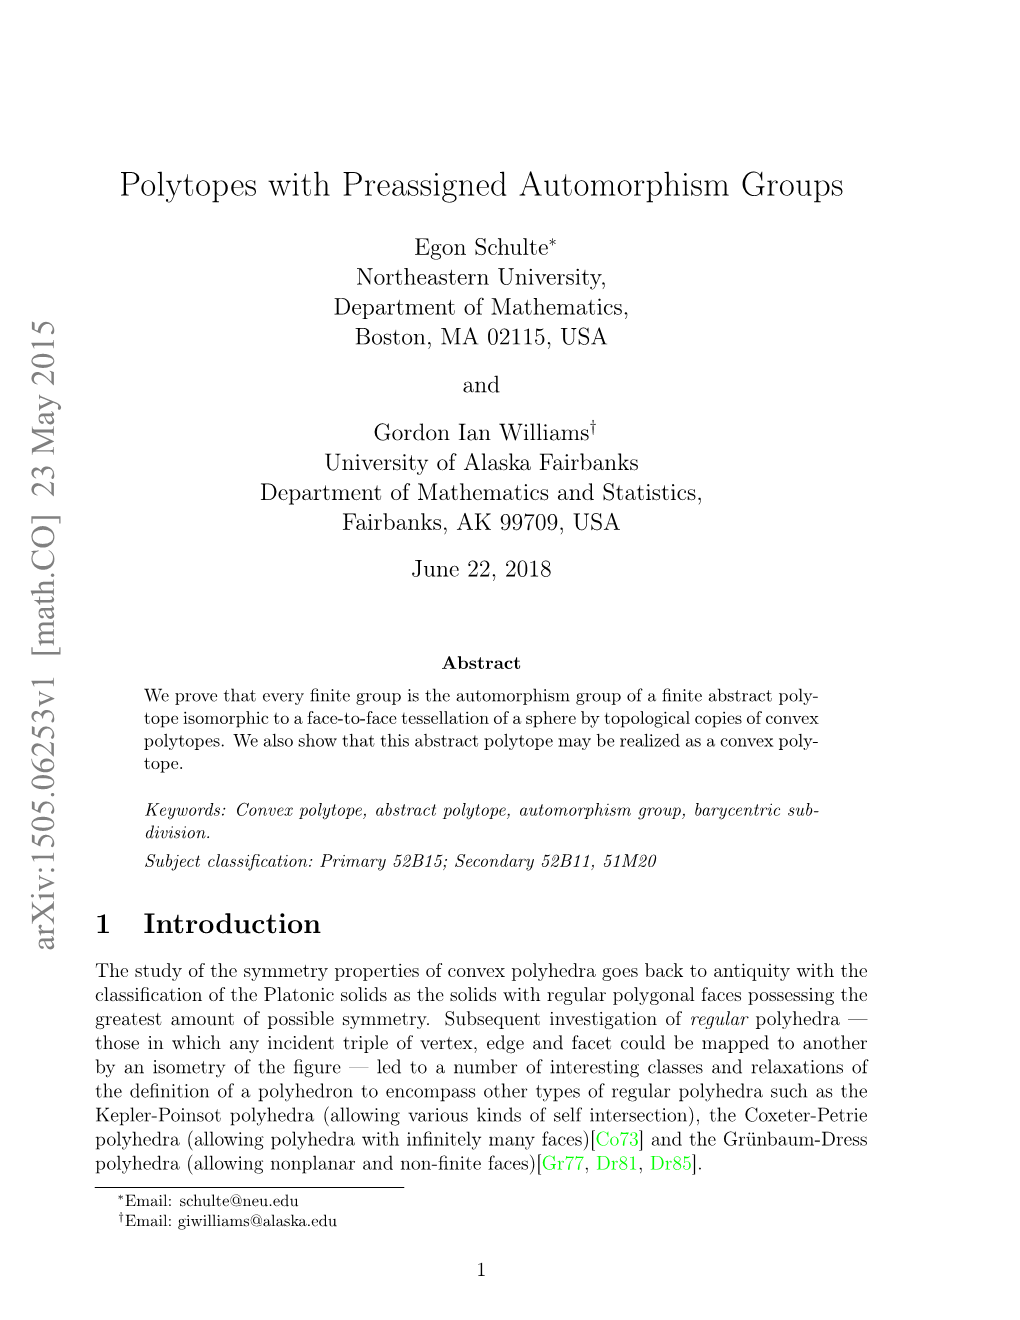 Polytopes with Preassigned Automorphism Groups